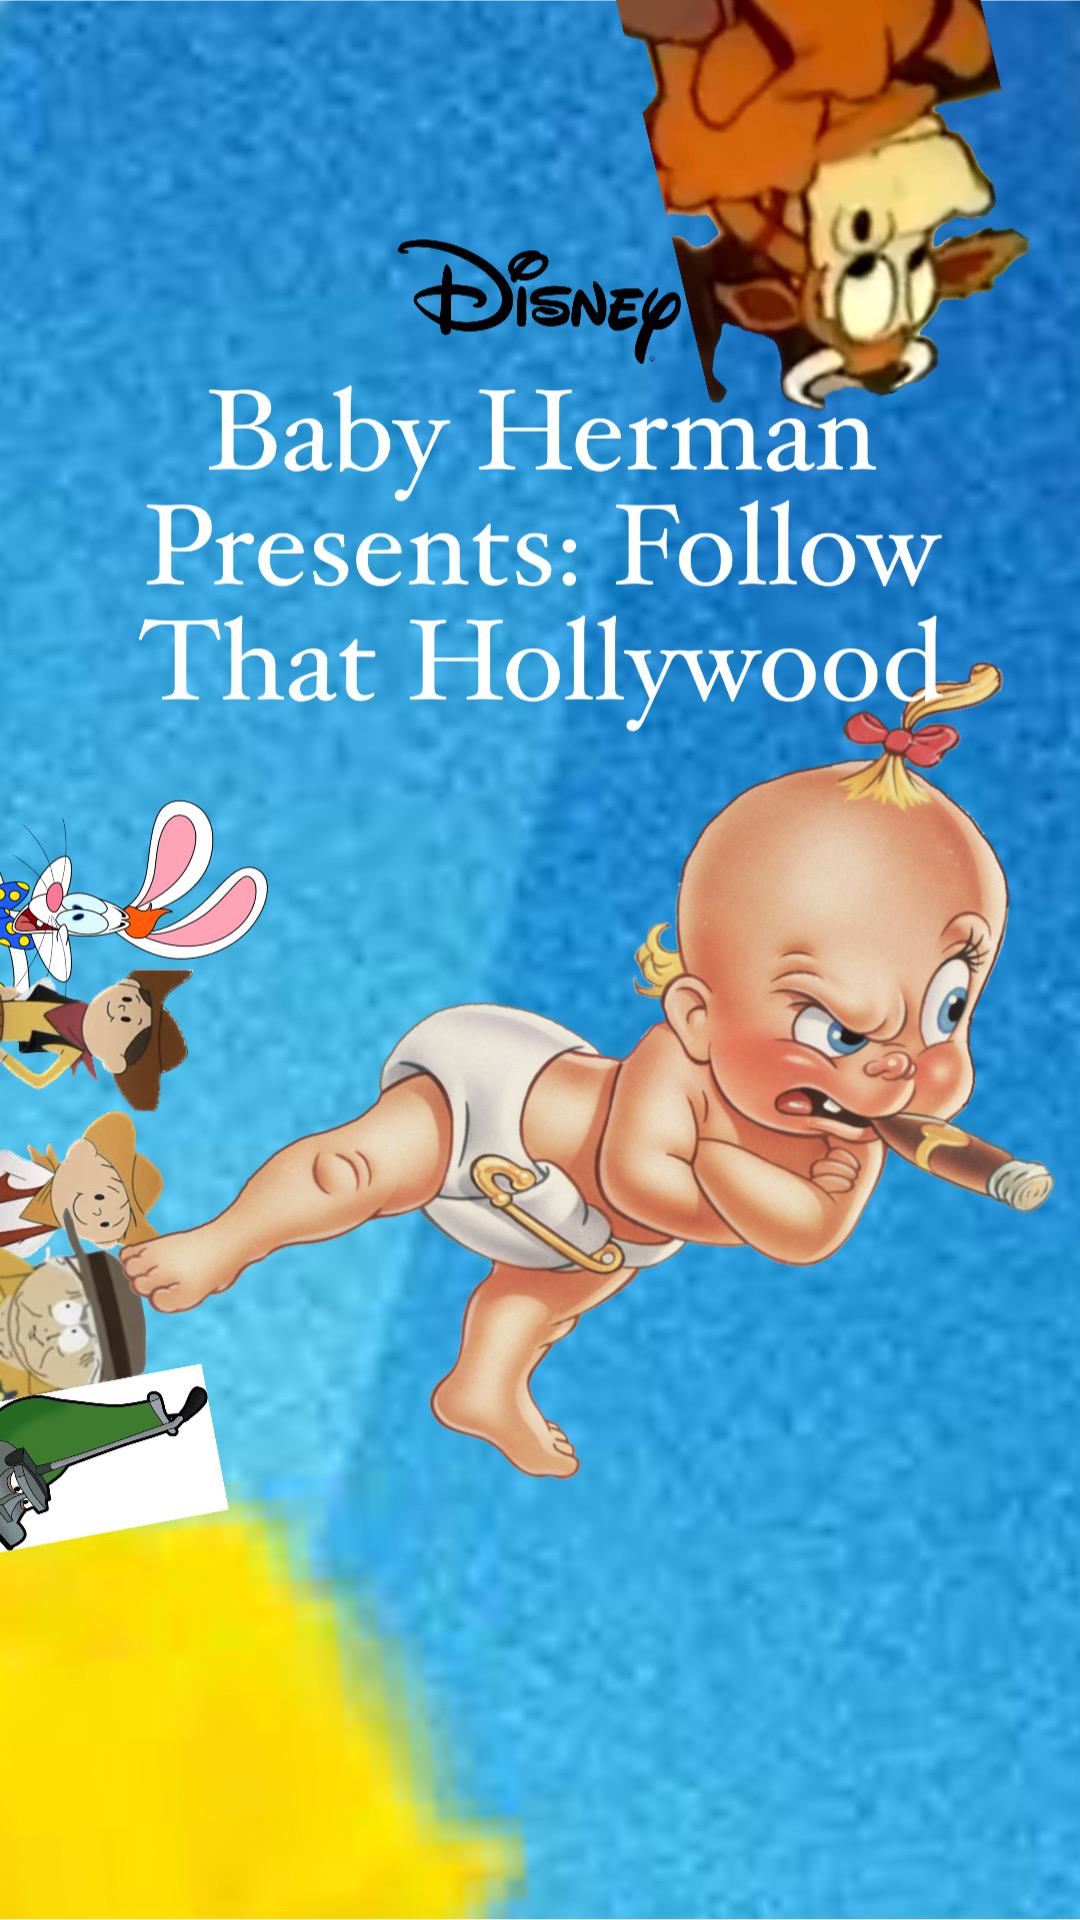 Baby Herman Presents: Follow That Hollywood (1991 film) Credits